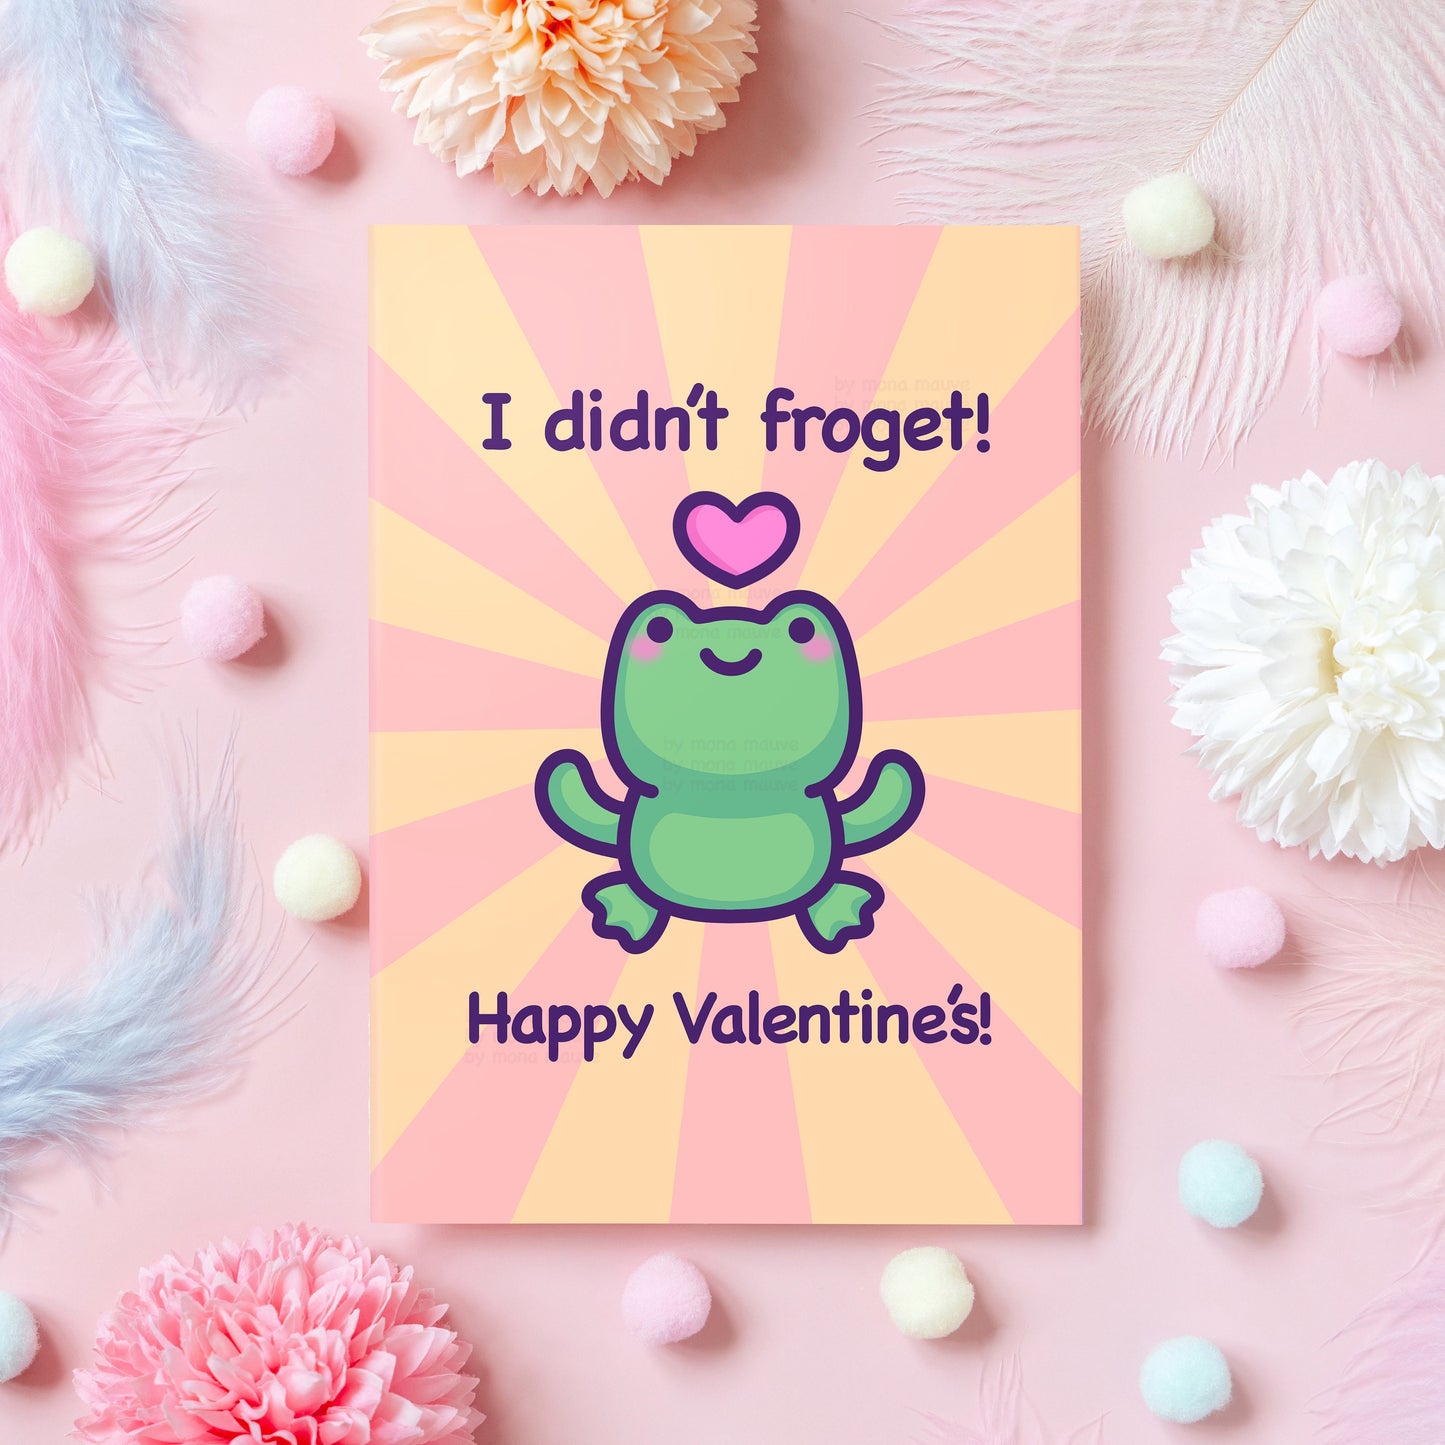 Cute Frog Valentine's Day Card | I Didn't Froget! | Pun Love Card